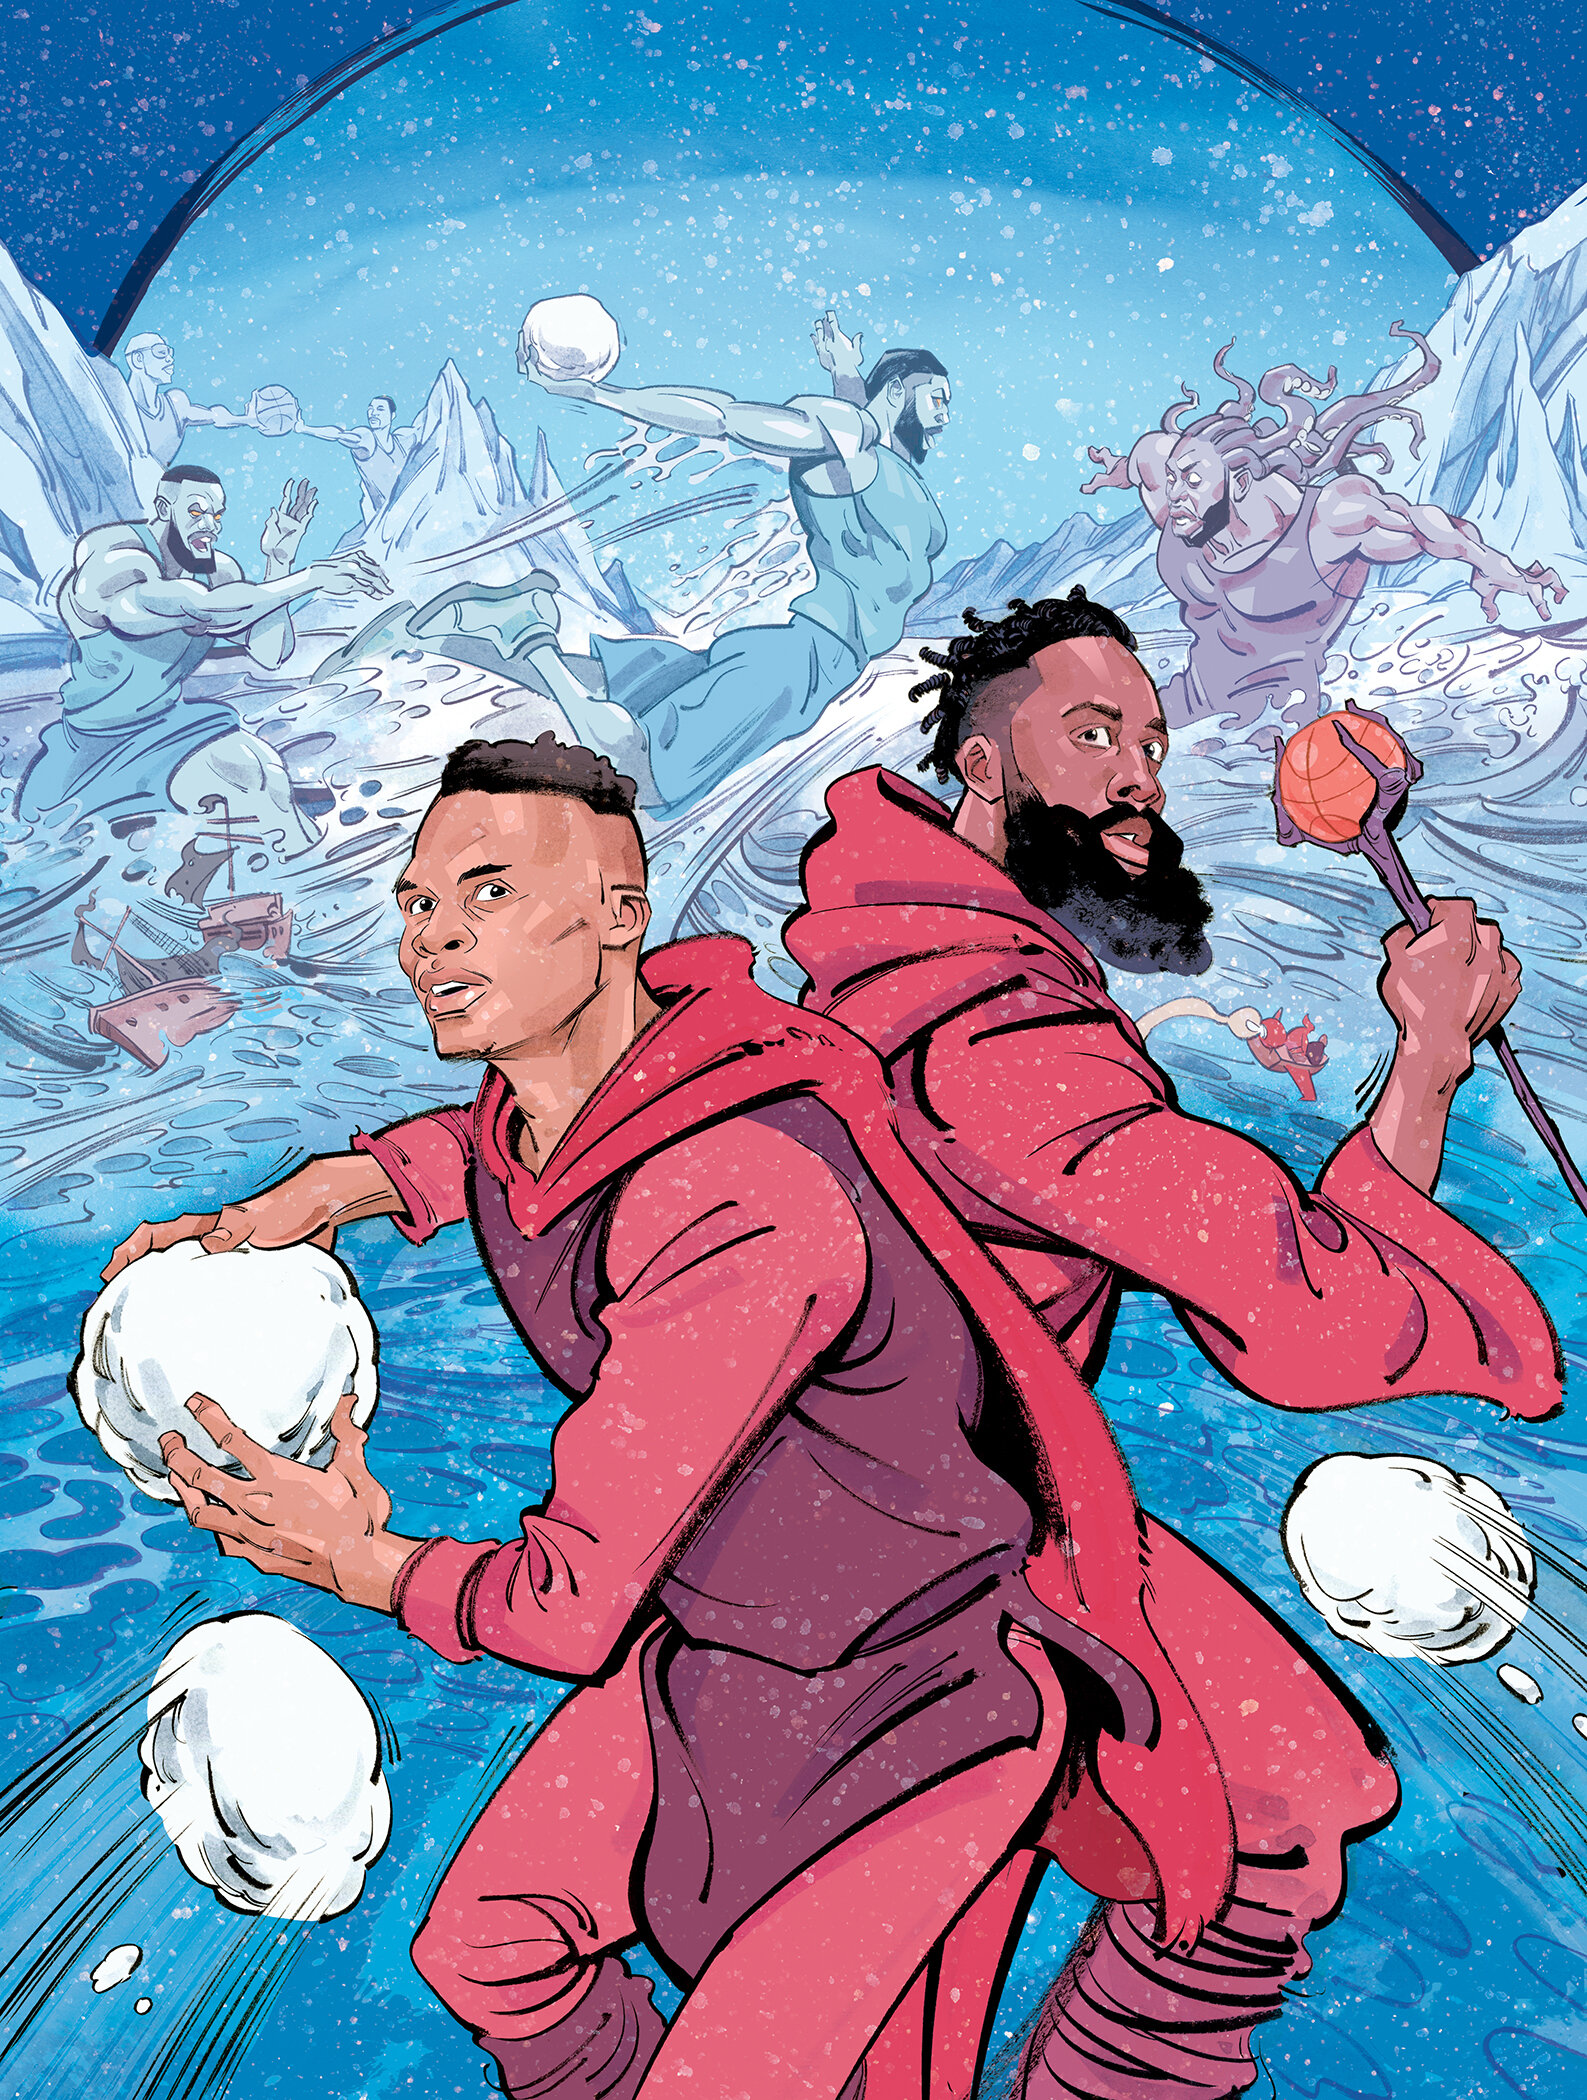 Snowballers 3 / Sports Illustrated Kids